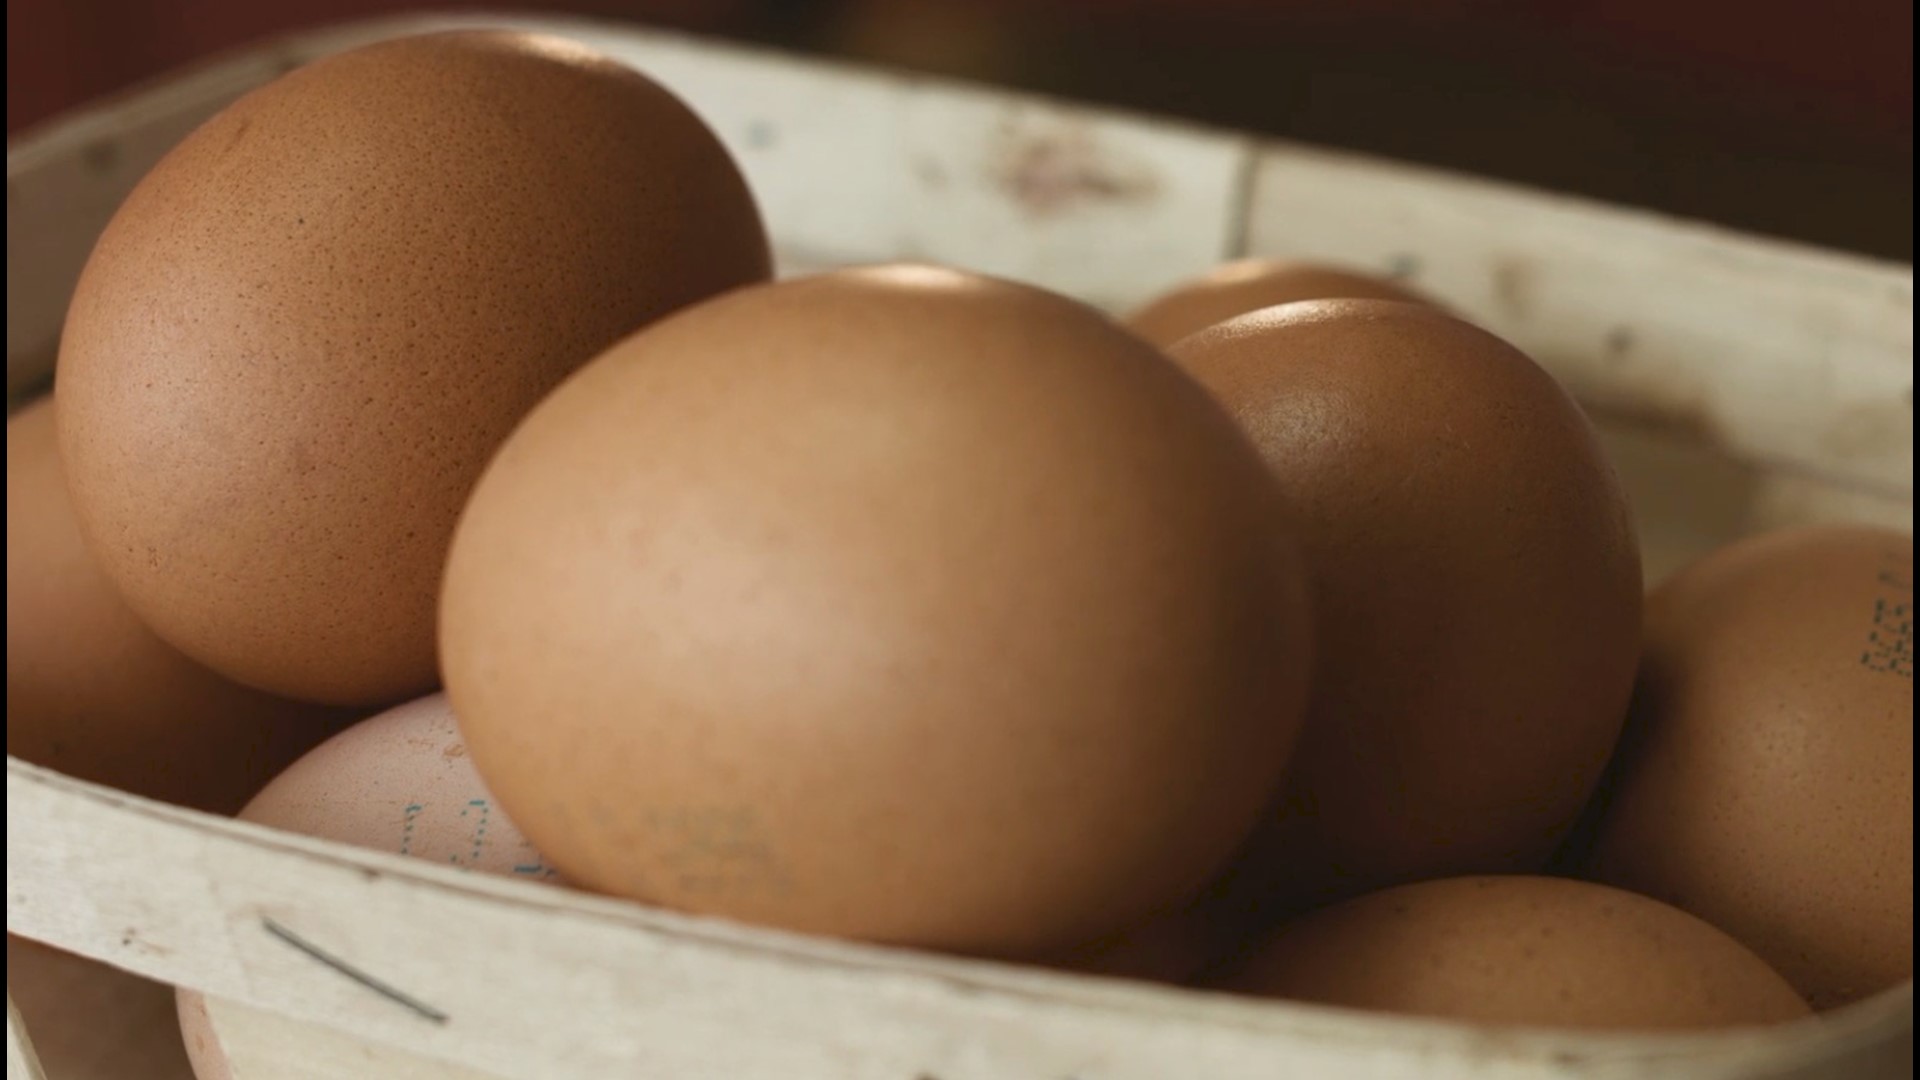 Do you know where your eggs are really coming from? Buzz60's Tony Spitz has the details.